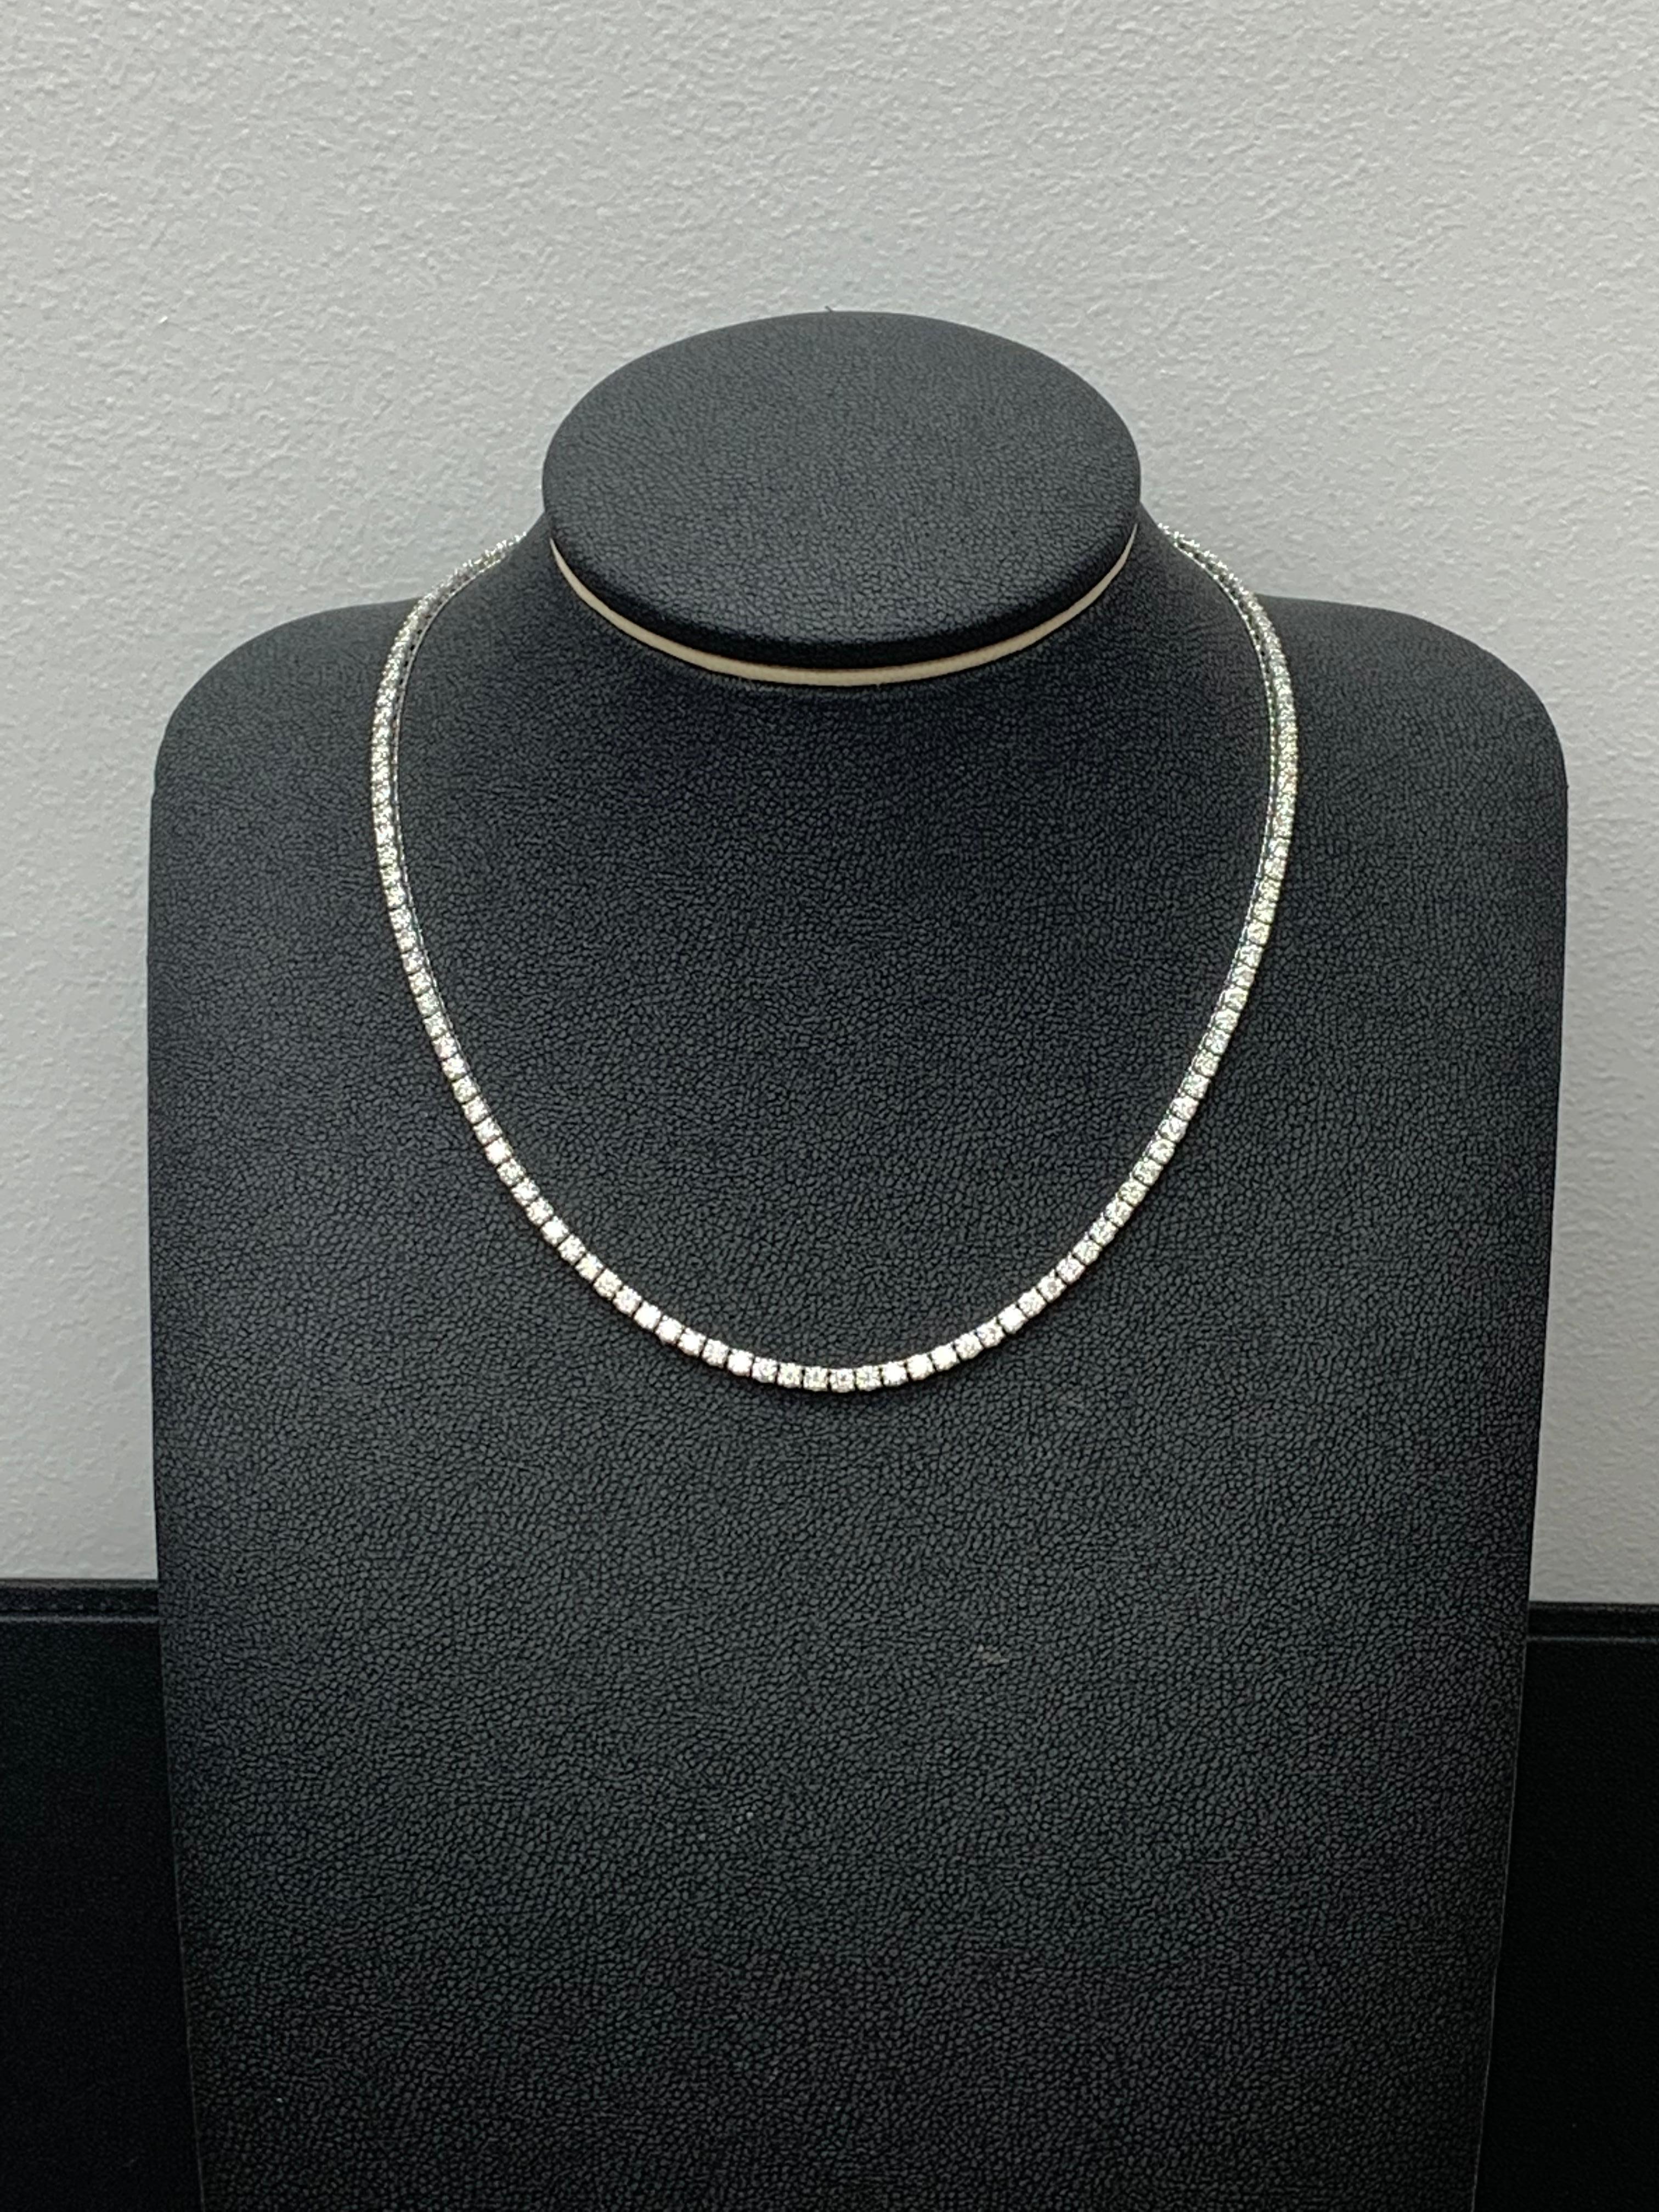 13.01 Carat Diamond Tennis Necklace in 14K White Gold For Sale 5